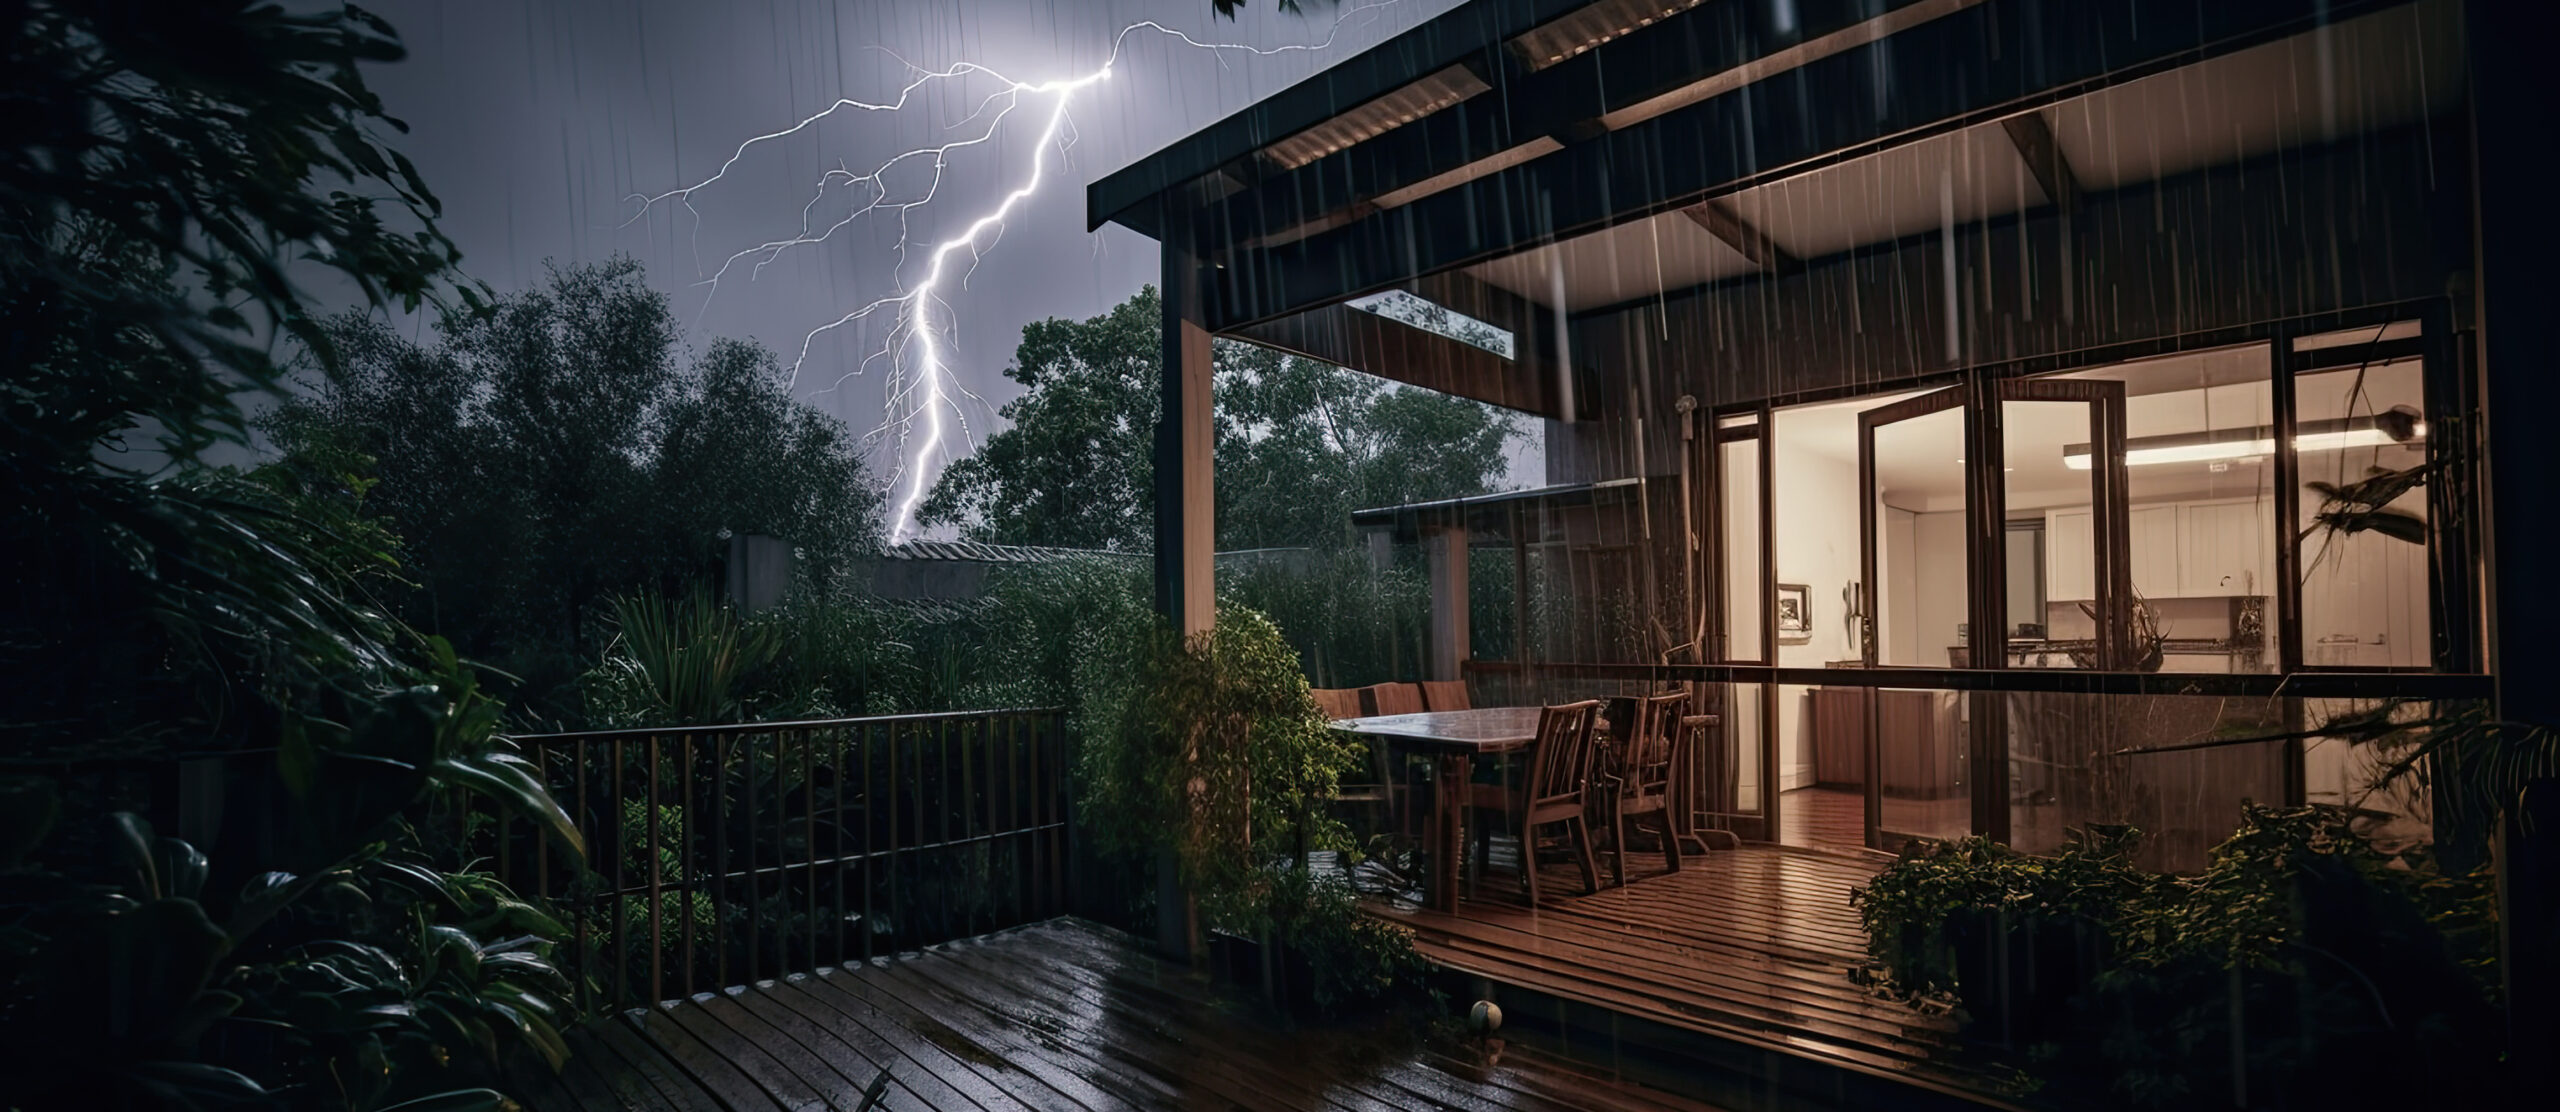 Home porch with lightning storm pictured behind